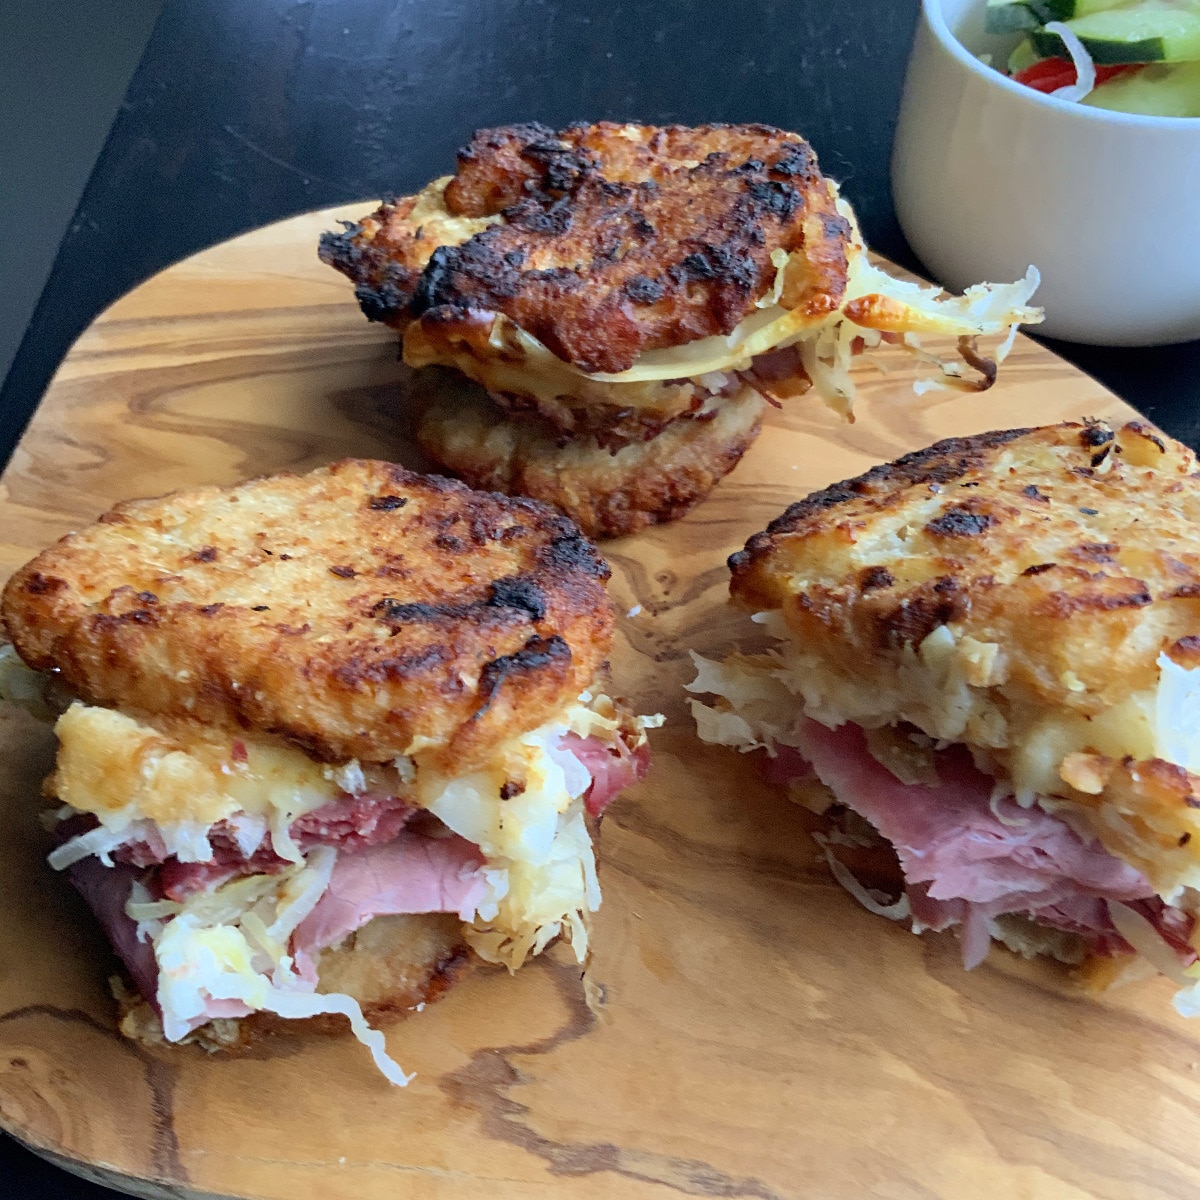 Potato pancake grilled Reuben sandwich on a wooden board with a salad in the background